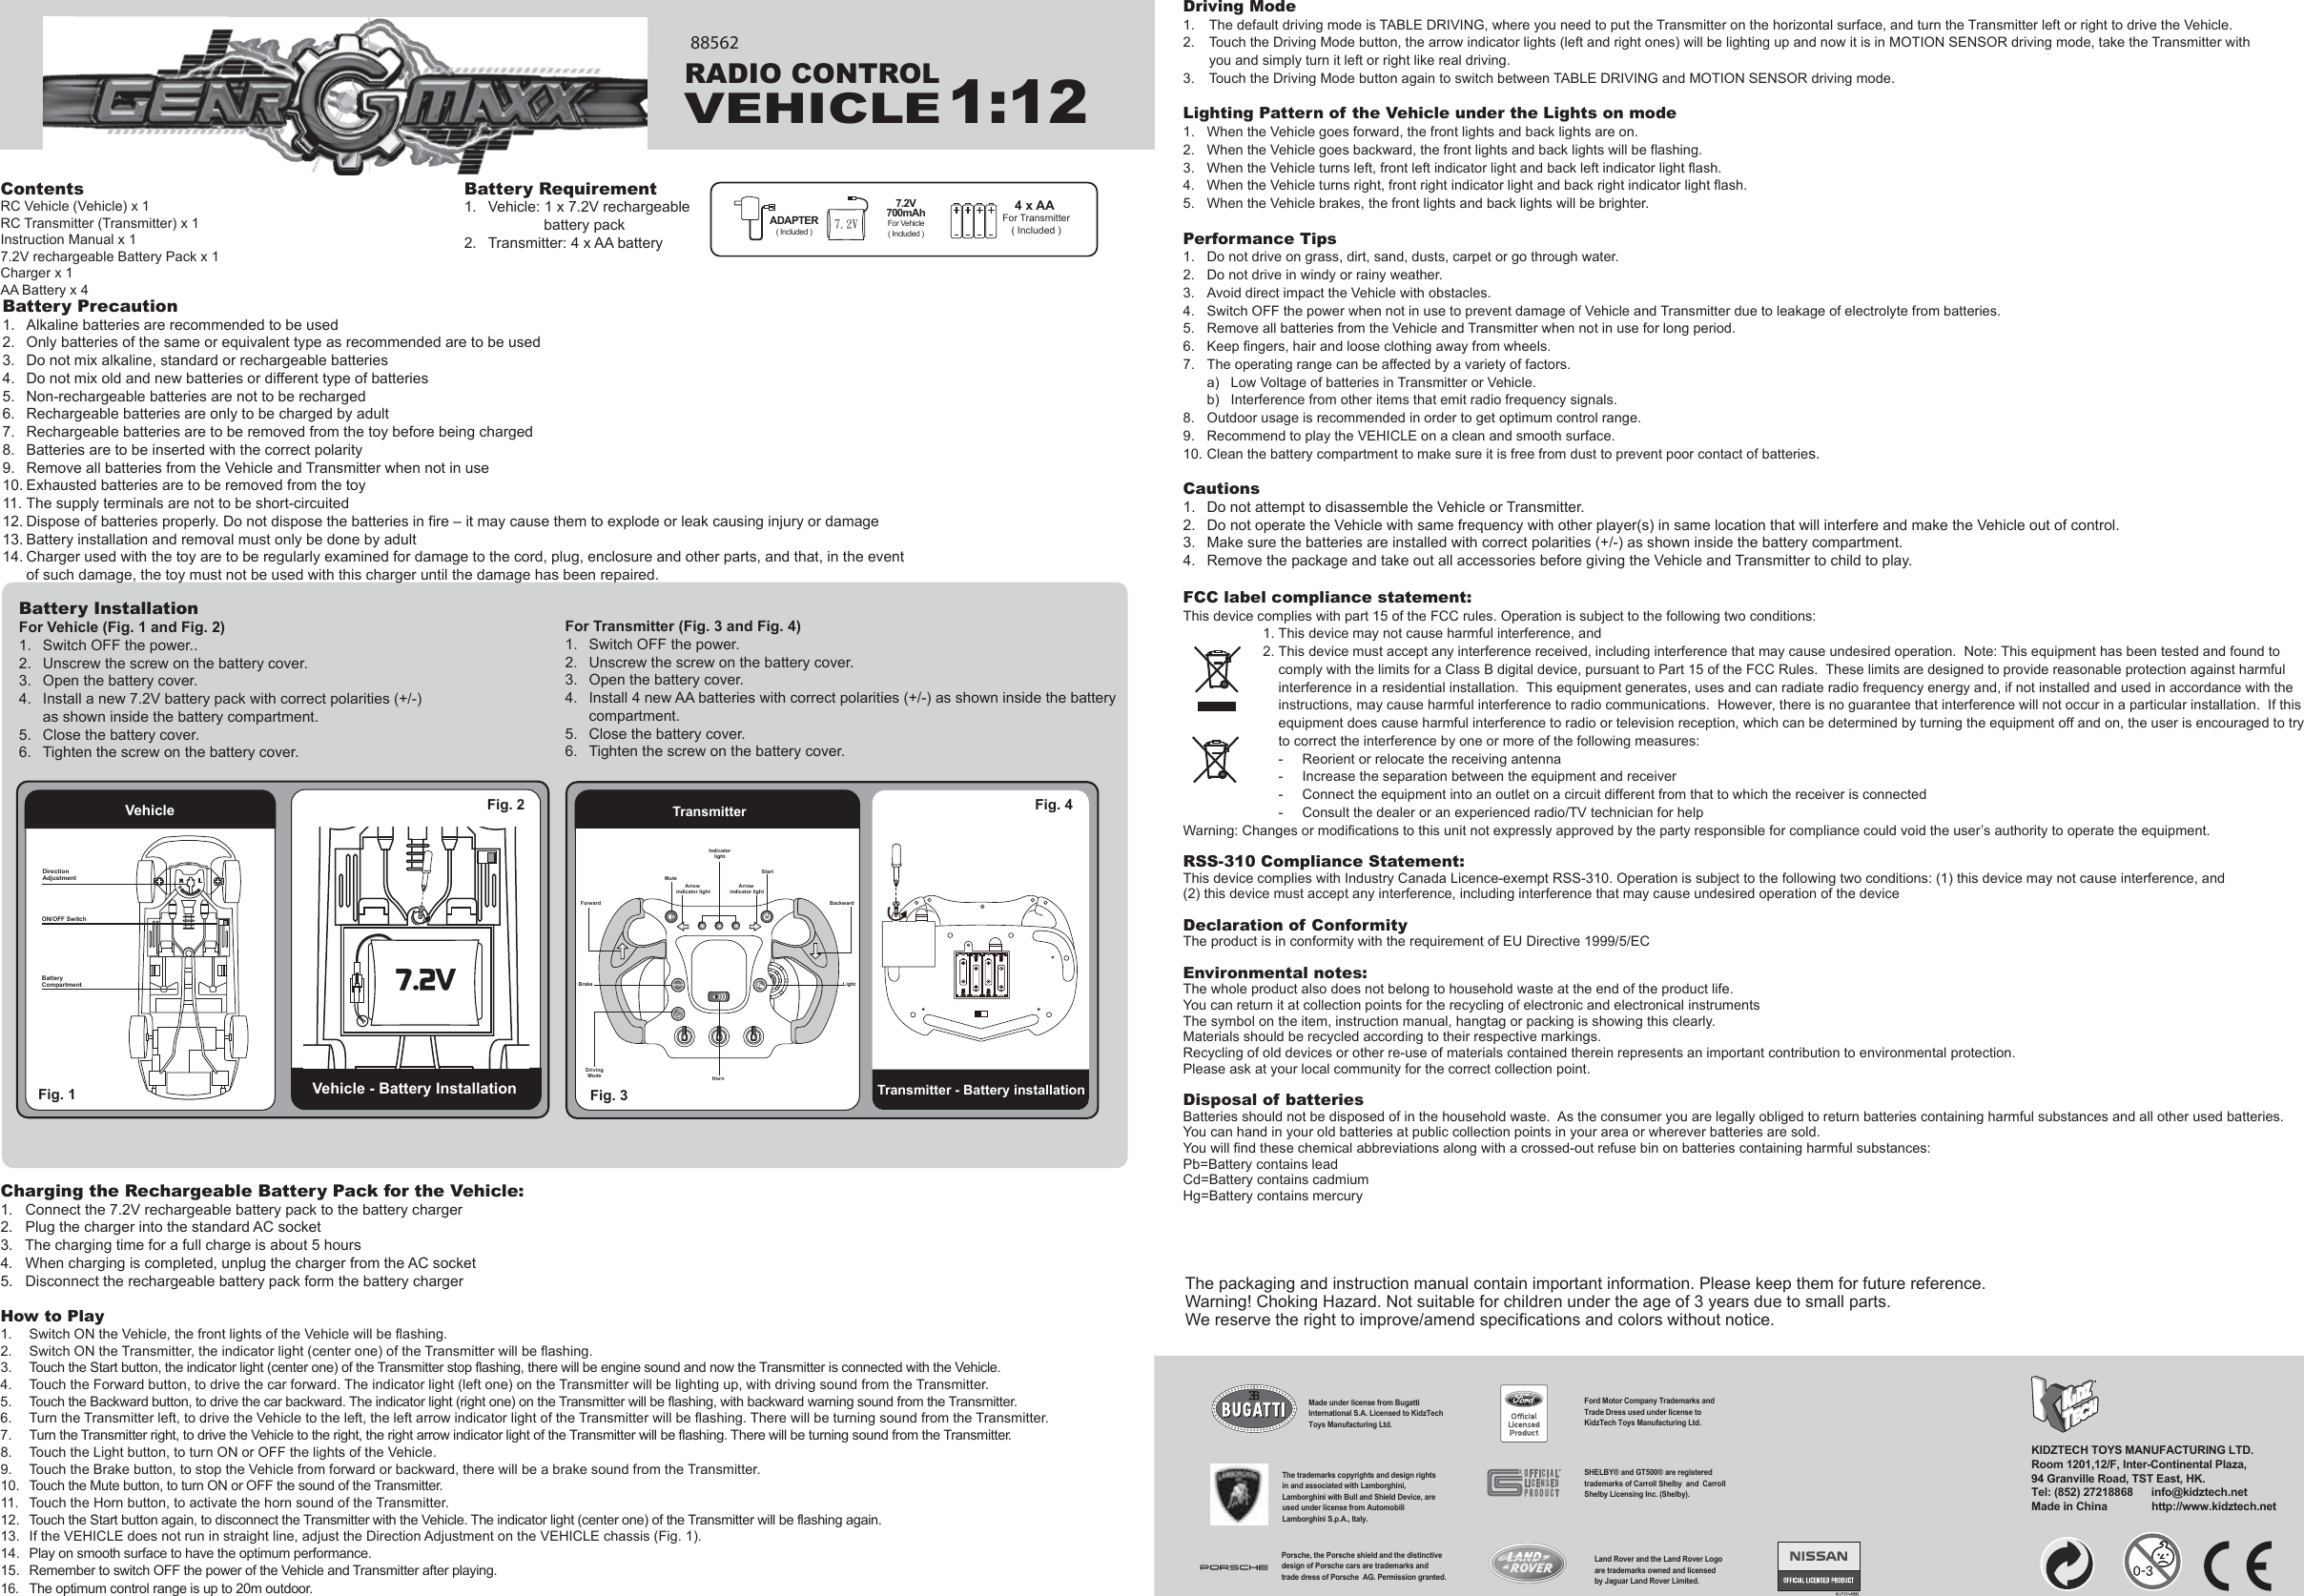 ContentsRC Vehicle (Vehicle) x 1RC Transmitter (Transmitter) x 1Instruction Manual x 17.2V rechargeable Battery Pack x 1Charger x 1AA Battery x 4Charging the Rechargeable Battery Pack for the Vehicle:1.   Connect the 7.2V rechargeable battery pack to the battery charger2.   Plug the charger into the standard AC socket3.   The charging time for a full charge is about 5 hours4.   When charging is completed, unplug the charger from the AC socket5.   Disconnect the rechargeable battery pack form the battery chargerHow to Play1.  Switch ON the Vehicle, the front lights of the Vehicle will be flashing.2.  Switch ON the Transmitter, the indicator light (center one) of the Transmitter will be flashing.3.  Touch the Start button, the indicator light (center one) of the Transmitter stop flashing, there will be engine sound and now the Transmitter is connected with the Vehicle.4.  Touch the Forward button, to drive the car forward. The indicator light (left one) on the Transmitter will be lighting up, with driving sound from the Transmitter.5.  Touch the Backward button, to drive the car backward. The indicator light (right one) on the Transmitter will be flashing, with backward warning sound from the Transmitter.6.  Turn the Transmitter left, to drive the Vehicle to the left, the left arrow indicator light of the Transmitter will be flashing. There will be turning sound from the Transmitter.7.  Turn the Transmitter right, to drive the Vehicle to the right, the right arrow indicator light of the Transmitter will be flashing. There will be turning sound from the Transmitter.8.  Touch the Light button, to turn ON or OFF the lights of the Vehicle.9.  Touch the Brake button, to stop the Vehicle from forward or backward, there will be a brake sound from the Transmitter.10.  Touch the Mute button, to turn ON or OFF the sound of the Transmitter.11.  Touch the Horn button, to activate the horn sound of the Transmitter.12.  Touch the Start button again, to disconnect the Transmitter with the Vehicle. The indicator light (center one) of the Transmitter will be flashing again.13.  If the VEHICLE does not run in straight line, adjust the Direction Adjustment on the VEHICLE chassis (Fig. 1).14.  Play on smooth surface to have the optimum performance.15.  Remember to switch OFF the power of the Vehicle and Transmitter after playing.16.   The optimum control range is up to 20m outdoor.Driving Mode1.  The default driving mode is TABLE DRIVING, where you need to put the Transmitter on the horizontal surface, and turn the Transmitter left or right to drive the Vehicle.2.  Touch the Driving Mode button, the arrow indicator lights (left and right ones) will be lighting up and now it is in MOTION SENSOR driving mode, take the Transmitter with   you and simply turn it left or right like real driving.3.  Touch the Driving Mode button again to switch between TABLE DRIVING and MOTION SENSOR driving mode.Lighting Pattern of the Vehicle under the Lights on mode1.  When the Vehicle goes forward, the front lights and back lights are on.2.  When the Vehicle goes backward, the front lights and back lights will be flashing.3.  When the Vehicle turns left, front left indicator light and back left indicator light flash.4.  When the Vehicle turns right, front right indicator light and back right indicator light flash.5.  When the Vehicle brakes, the front lights and back lights will be brighter.Performance Tips1.  Do not drive on grass, dirt, sand, dusts, carpet or go through water.2.  Do not drive in windy or rainy weather.3.  Avoid direct impact the Vehicle with obstacles.4.  Switch OFF the power when not in use to prevent damage of Vehicle and Transmitter due to leakage of electrolyte from batteries.5.  Remove all batteries from the Vehicle and Transmitter when not in use for long period.6.  Keep fingers, hair and loose clothing away from wheels.7.  The operating range can be affected by a variety of factors.  a)  Low Voltage of batteries in Transmitter or Vehicle.  b)  Interference from other items that emit radio frequency signals.8.  Outdoor usage is recommended in order to get optimum control range.9.  Recommend to play the VEHICLE on a clean and smooth surface.10. Clean the battery compartment to make sure it is free from dust to prevent poor contact of batteries.Cautions1.  Do not attempt to disassemble the Vehicle or Transmitter.2.  Do not operate the Vehicle with same frequency with other player(s) in same location that will interfere and make the Vehicle out of control.3.  Make sure the batteries are installed with correct polarities (+/-) as shown inside the battery compartment.4.  Remove the package and take out all accessories before giving the Vehicle and Transmitter to child to play.FCC label compliance statement:This device complies with part 15 of the FCC rules. Operation is subject to the following two conditions:1. This device may not cause harmful interference, and 2. This device must accept any interference received, including interference that may cause undesired operation.  Note: This equipment has been tested and found to   comply with the limits for a Class B digital device, pursuant to Part 15 of the FCC Rules.  These limits are designed to provide reasonable protection against harmful   interference in a residential installation.  This equipment generates, uses and can radiate radio frequency energy and, if not installed and used in accordance with the   instructions, may cause harmful interference to radio communications.  However, there is no guarantee that interference will not occur in a particular installation.  If this   equipment does cause harmful interference to radio or television reception, which can be determined by turning the equipment off and on, the user is encouraged to try   to correct the interference by one or more of the following measures:  -  Reorient or relocate the receiving antenna  -  Increase the separation between the equipment and receiver  -  Connect the equipment into an outlet on a circuit different from that to which the receiver is connected  -  Consult the dealer or an experienced radio/TV technician for helpWarning: Changes or modifications to this unit not expressly approved by the party responsible for compliance could void the user’s authority to operate the equipment.RSS-310 Compliance Statement:This device complies with Industry Canada Licence-exempt RSS-310. Operation is subject to the following two conditions: (1) this device may not cause interference, and(2) this device must accept any interference, including interference that may cause undesired operation of the deviceDeclaration of ConformityThe product is in conformity with the requirement of EU Directive 1999/5/ECEnvironmental notes:The whole product also does not belong to household waste at the end of the product life.You can return it at collection points for the recycling of electronic and electronical instrumentsThe symbol on the item, instruction manual, hangtag or packing is showing this clearly.Materials should be recycled according to their respective markings.Recycling of old devices or other re-use of materials contained therein represents an important contribution to environmental protection.Please ask at your local community for the correct collection point.Disposal of batteriesBatteries should not be disposed of in the household waste.  As the consumer you are legally obliged to return batteries containing harmful substances and all other used batteries.  You can hand in your old batteries at public collection points in your area or wherever batteries are sold.You will find these chemical abbreviations along with a crossed-out refuse bin on batteries containing harmful substances:Pb=Battery contains leadCd=Battery contains cadmiumHg=Battery contains mercuryBattery Requirement1.  Vehicle: 1 x 7.2V rechargeable      battery pack2.  Transmitter: 4 x AA batteryThe packaging and instruction manual contain important information. Please keep them for future reference.Warning! Choking Hazard. Not suitable for children under the age of 3 years due to small parts.We reserve the right to improve/amend specifications and colors without notice.For Transmitter (Fig. 3 and Fig. 4)1.  Switch OFF the power.2.  Unscrew the screw on the battery cover.3.  Open the battery cover.4.  Install 4 new AA batteries with correct polarities (+/-) as shown inside the battery   compartment.5.  Close the battery cover.6.  Tighten the screw on the battery cover.Battery InstallationFor Vehicle (Fig. 1 and Fig. 2)1.  Switch OFF the power..2.  Unscrew the screw on the battery cover.3.  Open the battery cover.4.  Install a new 7.2V battery pack with correct polarities (+/-)   as shown inside the battery compartment.5.  Close the battery cover.6.  Tighten the screw on the battery cover.KT08/07/14-00ERADIO CONTROLVEHICLE1:12KIDZTECH TOYS MANUFACTURING LTD. Room 1201,12/F, Inter-Continental Plaza,94 Granville Road, TST East, HK.Tel: (852) 27218868      info@kidztech.netMade in China            http://www.kidztech.net88562Vehicle - Battery InstallationFig. 1 Vehicle Fig. 2  TransmitterTransmitter - Battery installationFig. 3 Fig. 4 MuteStartForward BackwardLightBrakeHornDrivingModeArrow indicator lightArrow indicator lightIndicatorlightDirection AdjustmentON/OFF SwitchBatteryCompartment4 x AA For Transmitter( Included )ADAPTER( Included )7.2V700mAhFor Vehicle( Included )7.2VPorsche, the Porsche shield and the distinctive design of Porsche cars are trademarks and trade dress of Porsche  AG. Permission granted.Ford Motor Company Trademarks and Trade Dress used under license to KidzTech Toys Manufacturing Ltd.The trademarks copyrights and design rights in and associated with Lamborghini, Lamborghini with Bull and Shield Device, are used under license from Automobili Lamborghini S.p.A., Italy.SHELBY® and GT500® are registered trademarks of Carroll Shelby  and  Carroll Shelby Licensing Inc. (Shelby).Land Rover and the Land Rover Logo are trademarks owned and licensed by Jaguar Land Rover Limited.Made under license from Bugatti International S.A. Licensed to KidzTech Toys Manufacturing Ltd.  RLBattery Precaution1.  Alkaline batteries are recommended to be used2.  Only batteries of the same or equivalent type as recommended are to be used3.  Do not mix alkaline, standard or rechargeable batteries4.  Do not mix old and new batteries or different type of batteries5.  Non-rechargeable batteries are not to be recharged6.  Rechargeable batteries are only to be charged by adult7.  Rechargeable batteries are to be removed from the toy before being charged8.  Batteries are to be inserted with the correct polarity9.  Remove all batteries from the Vehicle and Transmitter when not in use10. Exhausted batteries are to be removed from the toy11. The supply terminals are not to be short-circuited12. Dispose of batteries properly. Do not dispose the batteries in fire – it may cause them to explode or leak causing injury or damage13.14. Battery installation and removal must only be done by adultCharger used with the toy are to be regularly examined for damage to the cord, plug, enclosure and other parts, and that, in the event of such damage, the toy must not be used with this charger until the damage has been repaired.